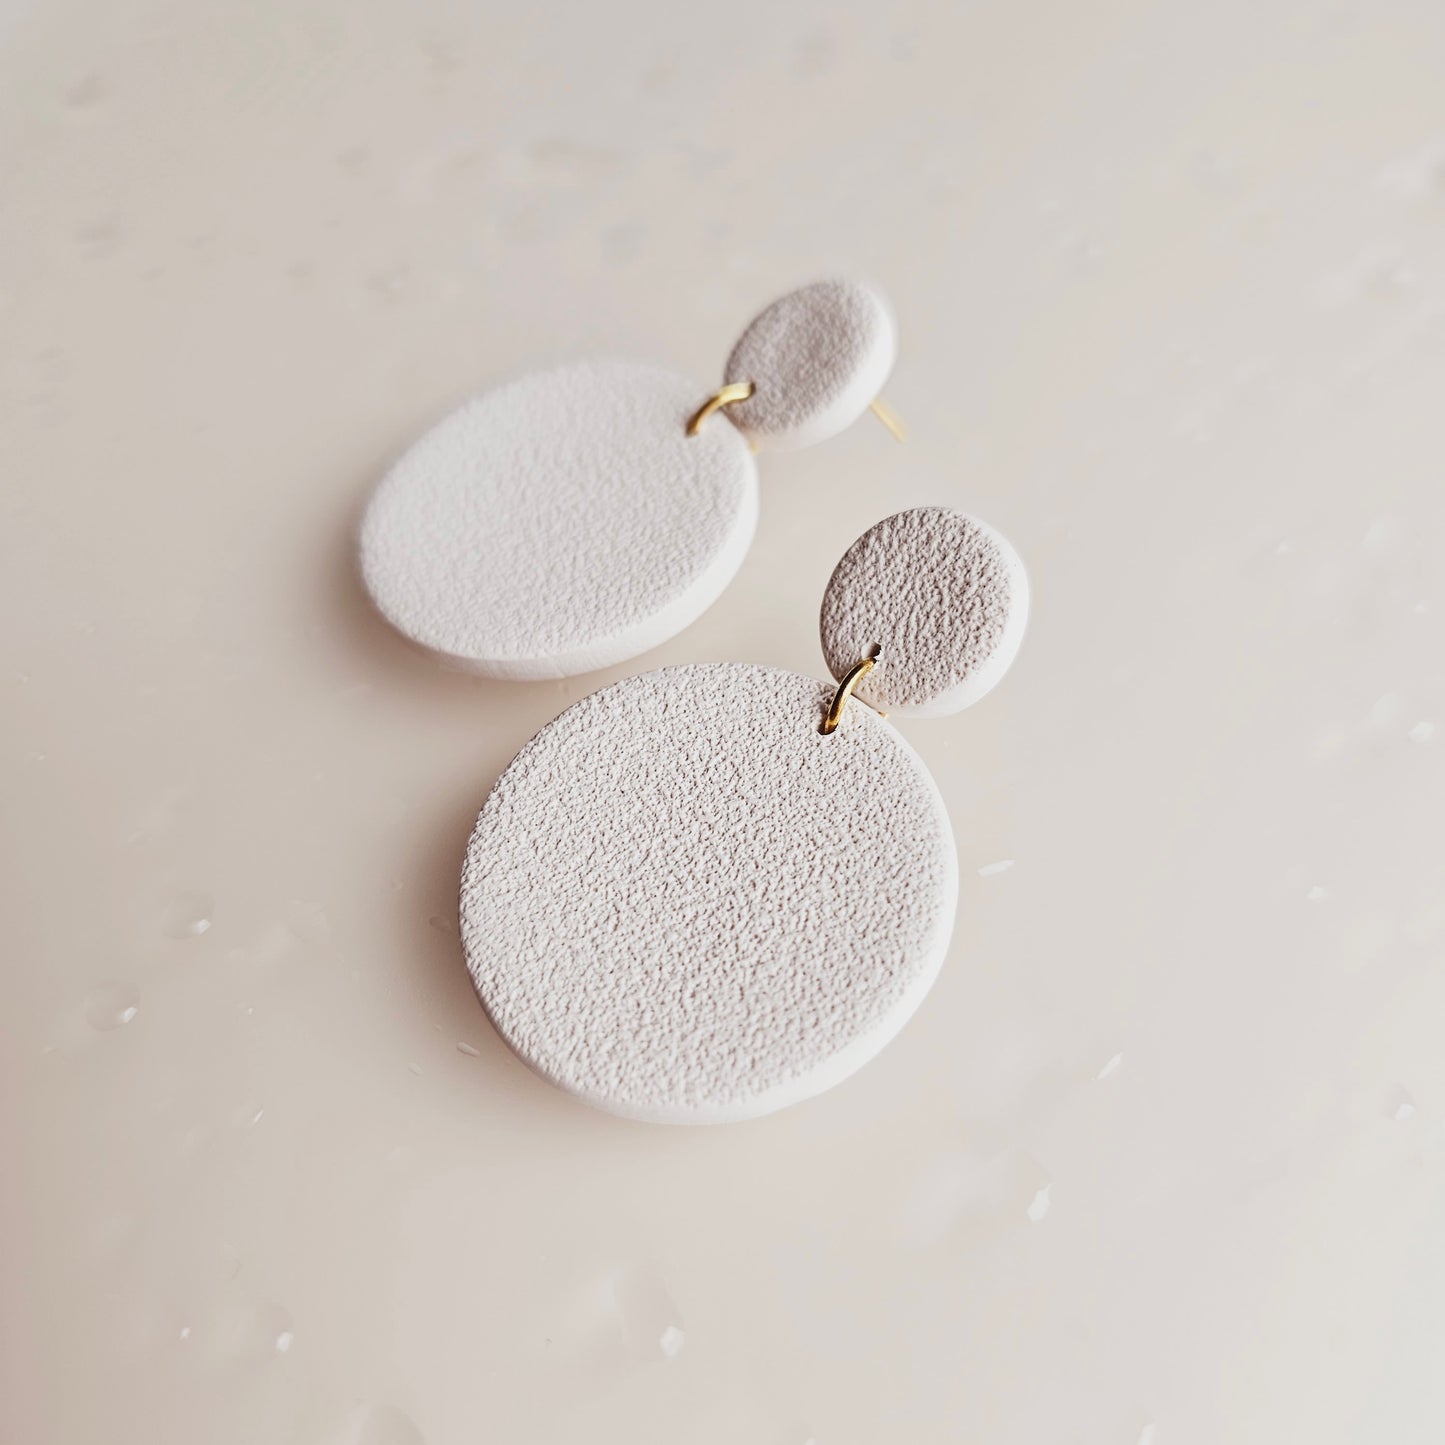 Audrey | Circle statement earrings | Textured earrings | Concrete earrings | Lightweight earrings | Neutral toned earrings